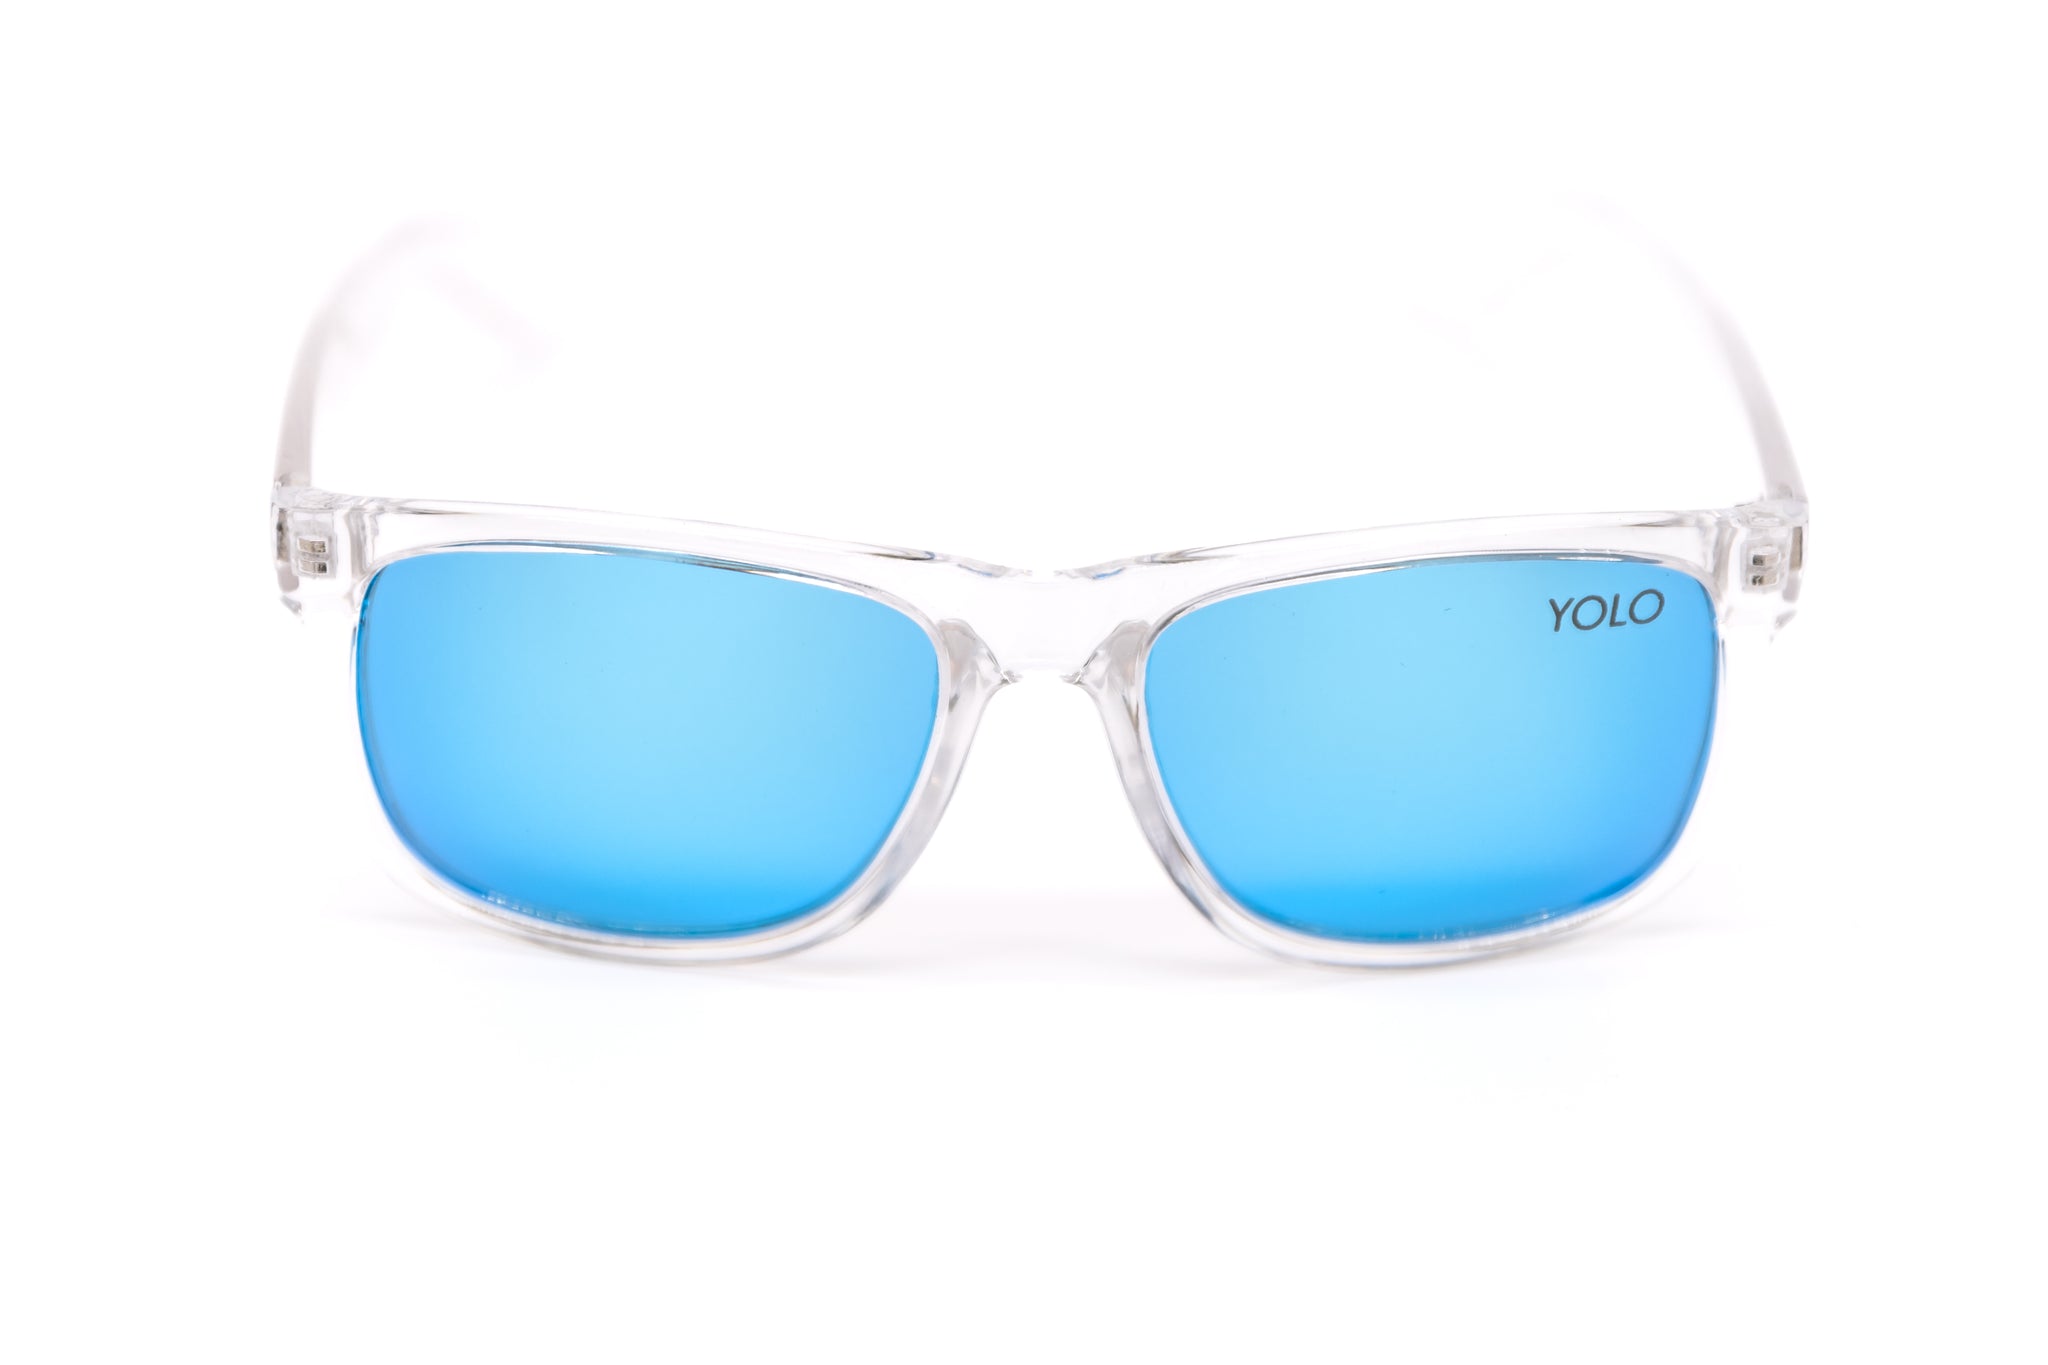 Lens Eyewear – Sunglasses Mirrored Square Polarized with Framed Yolo Clear Sport